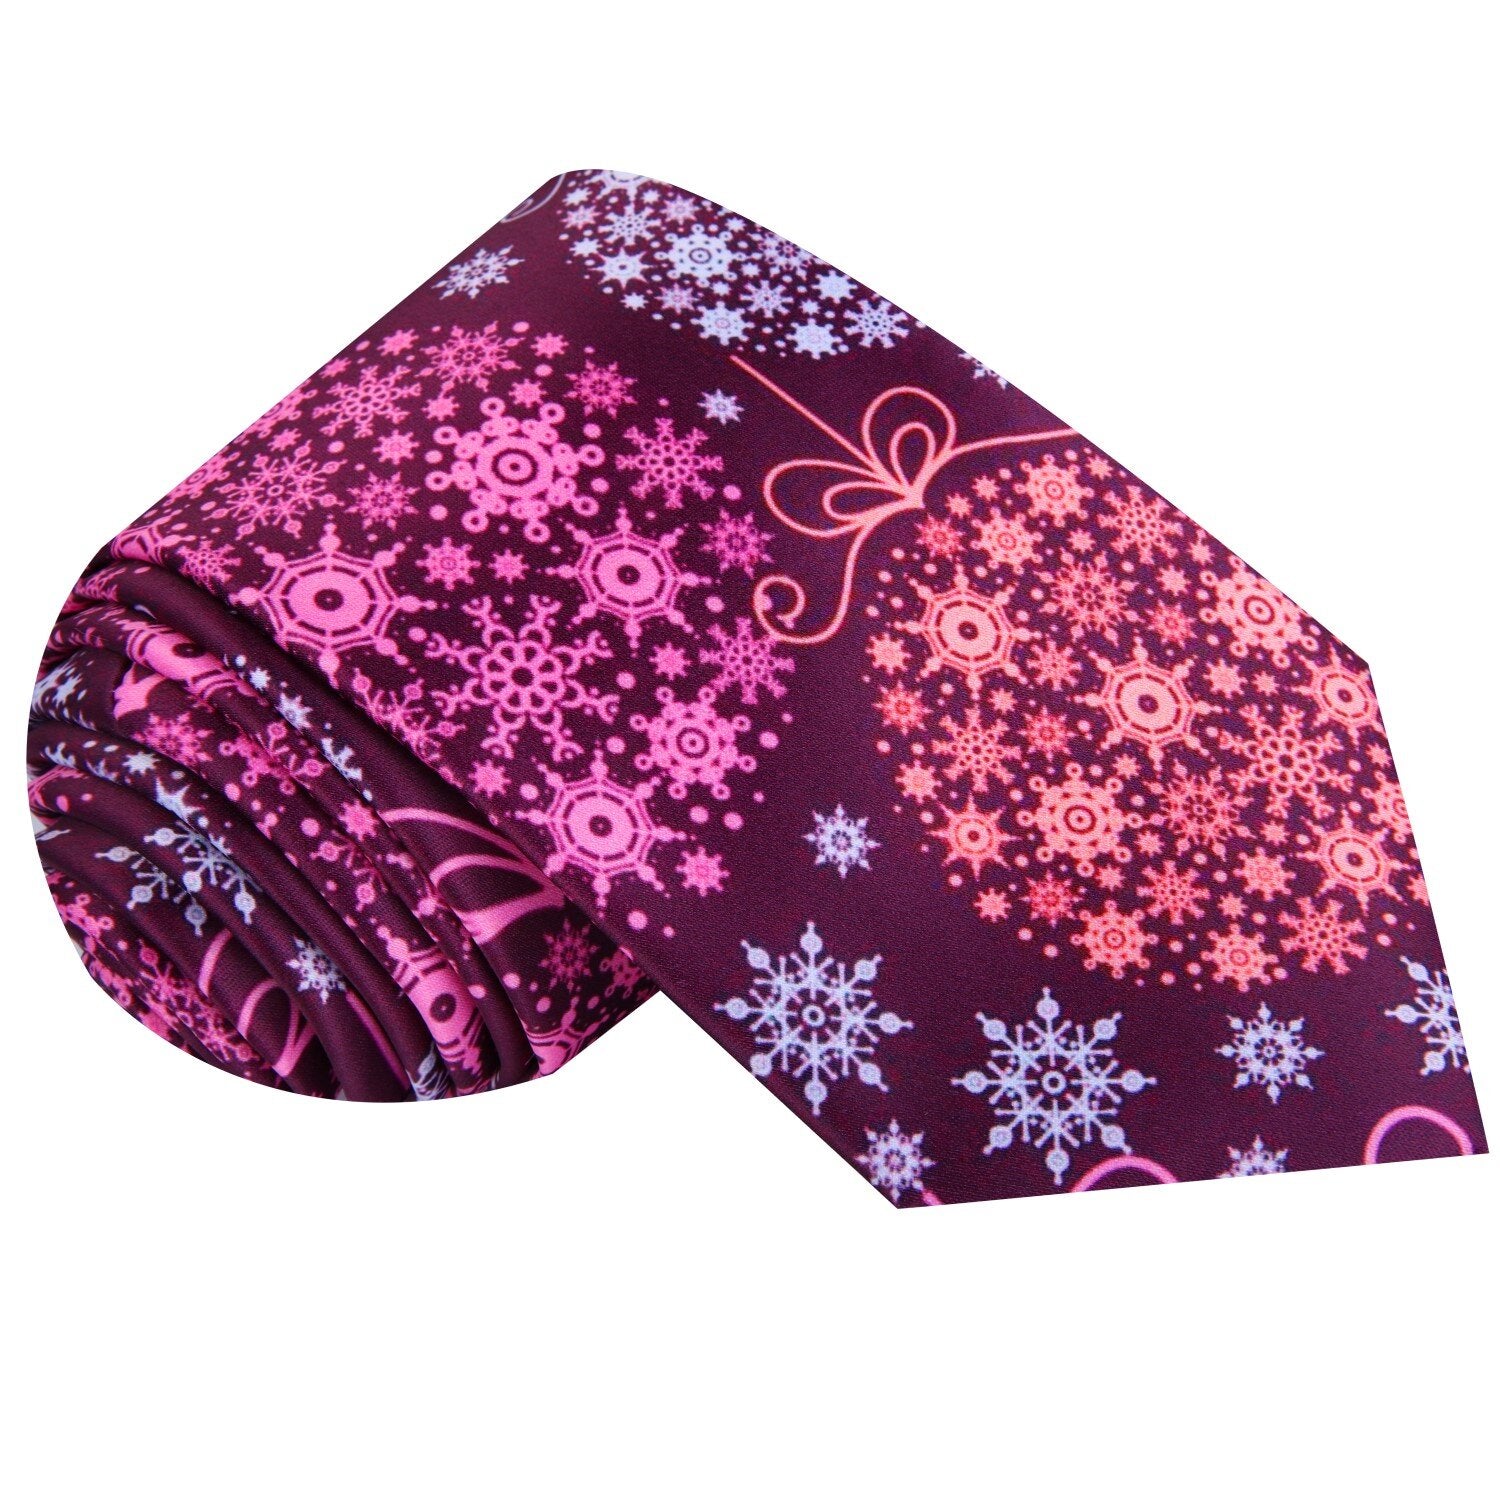 Plum, Pink, Red, White Christmas Ornaments Tie  